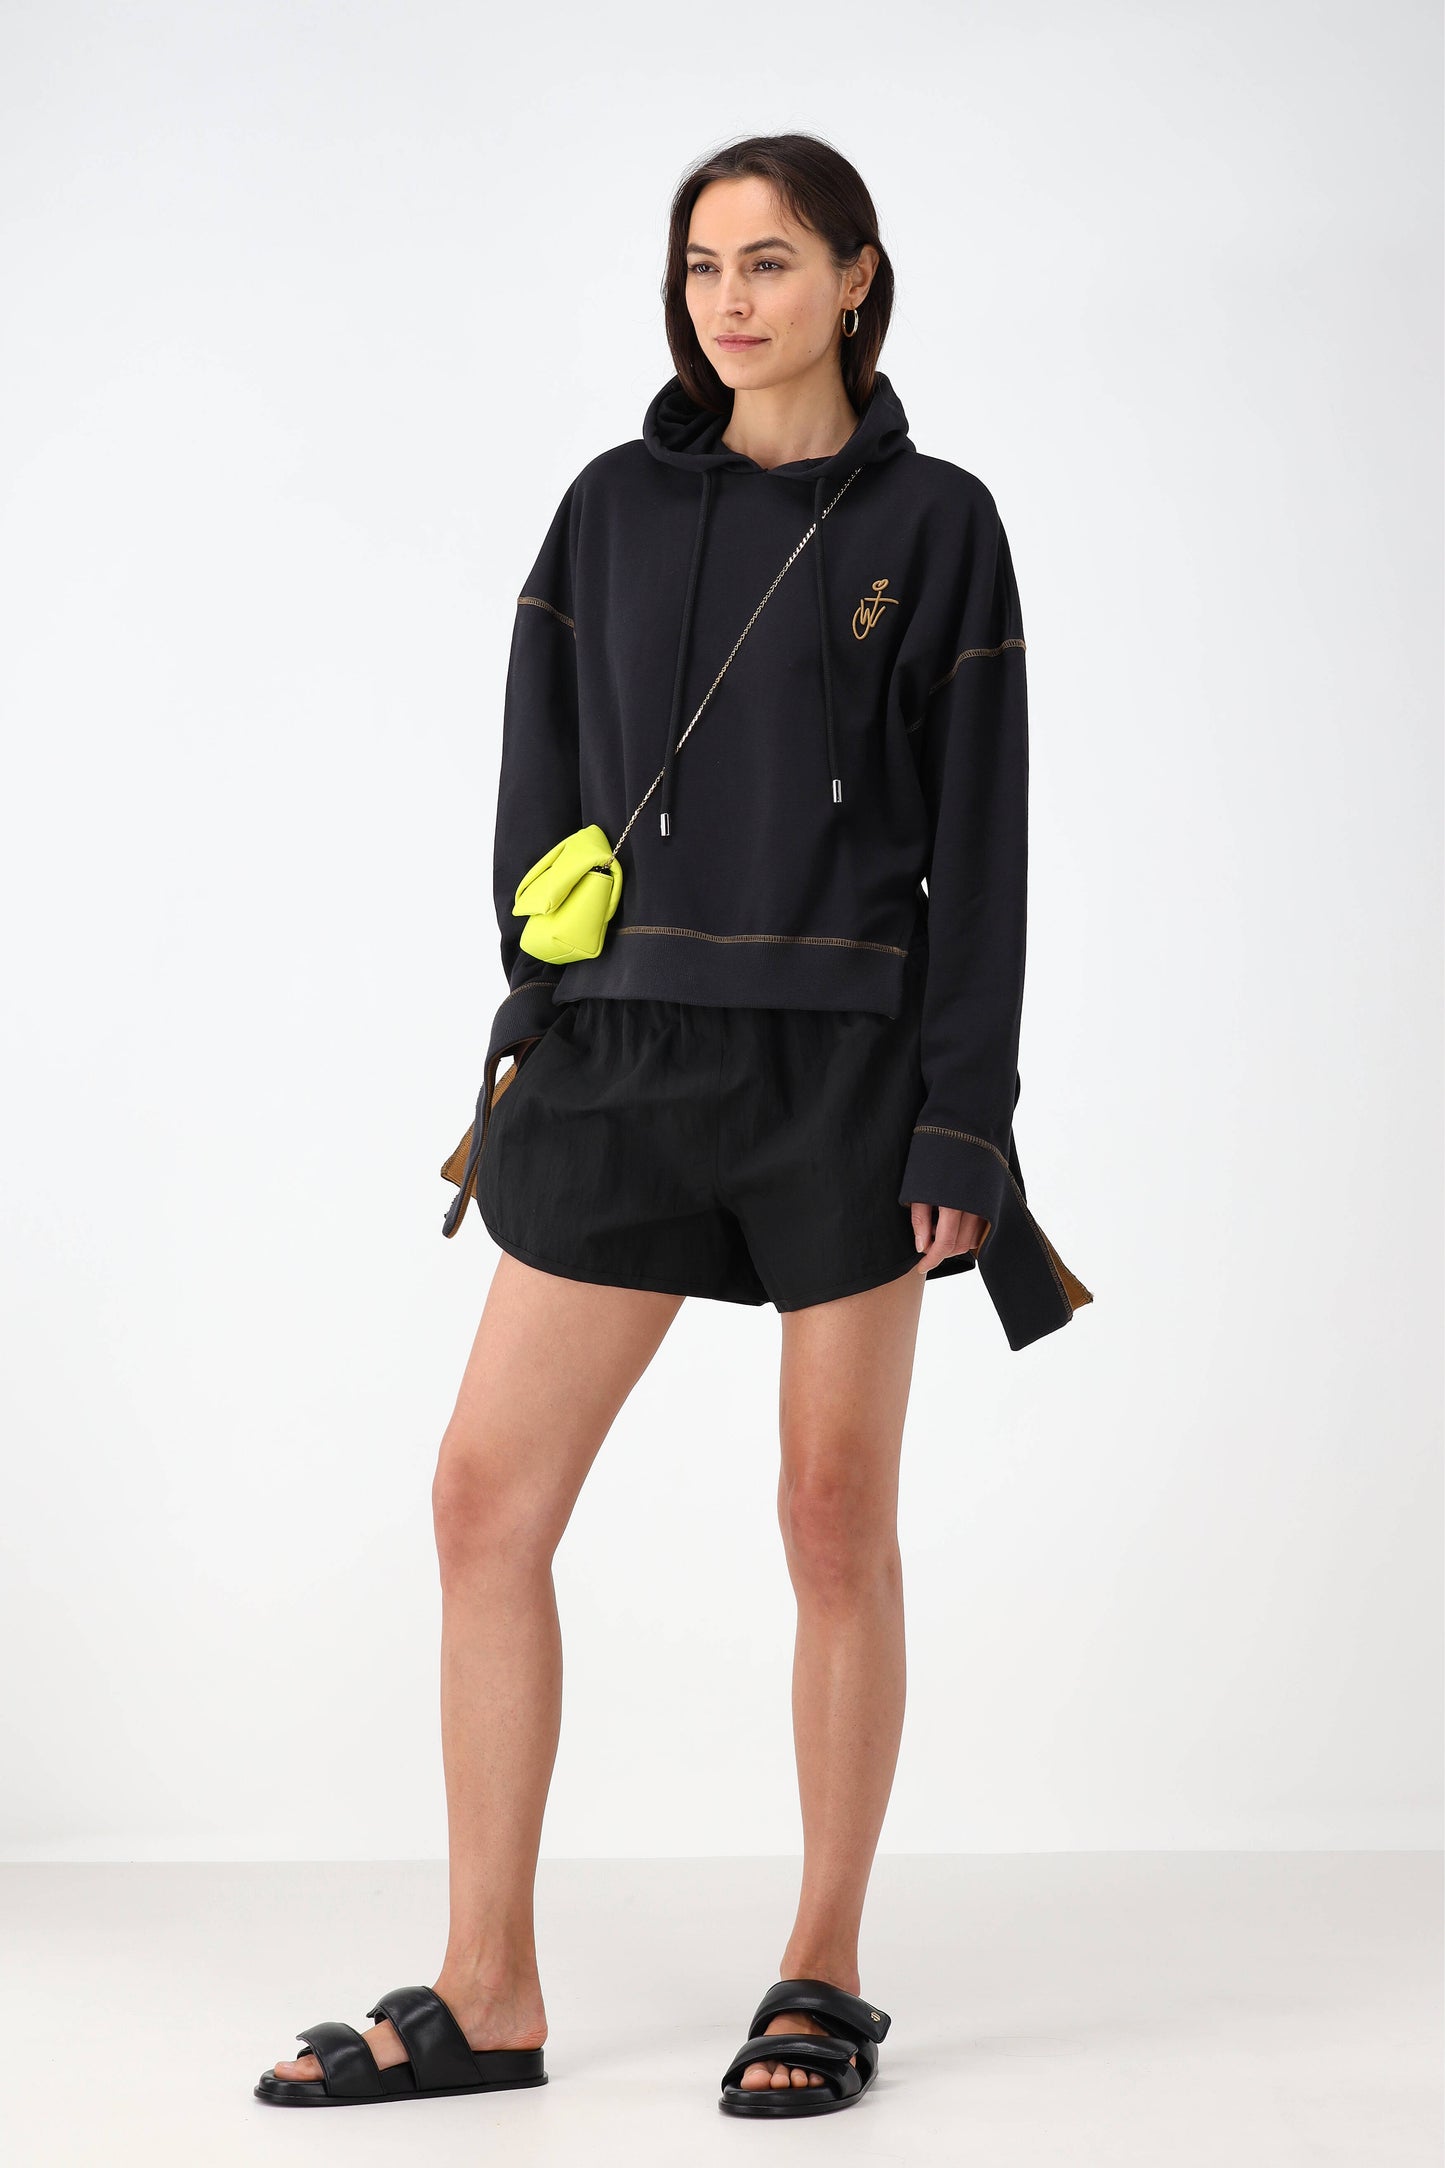 Hoodie Cropped Knot in SchwarzJW Anderson - Anita Hass